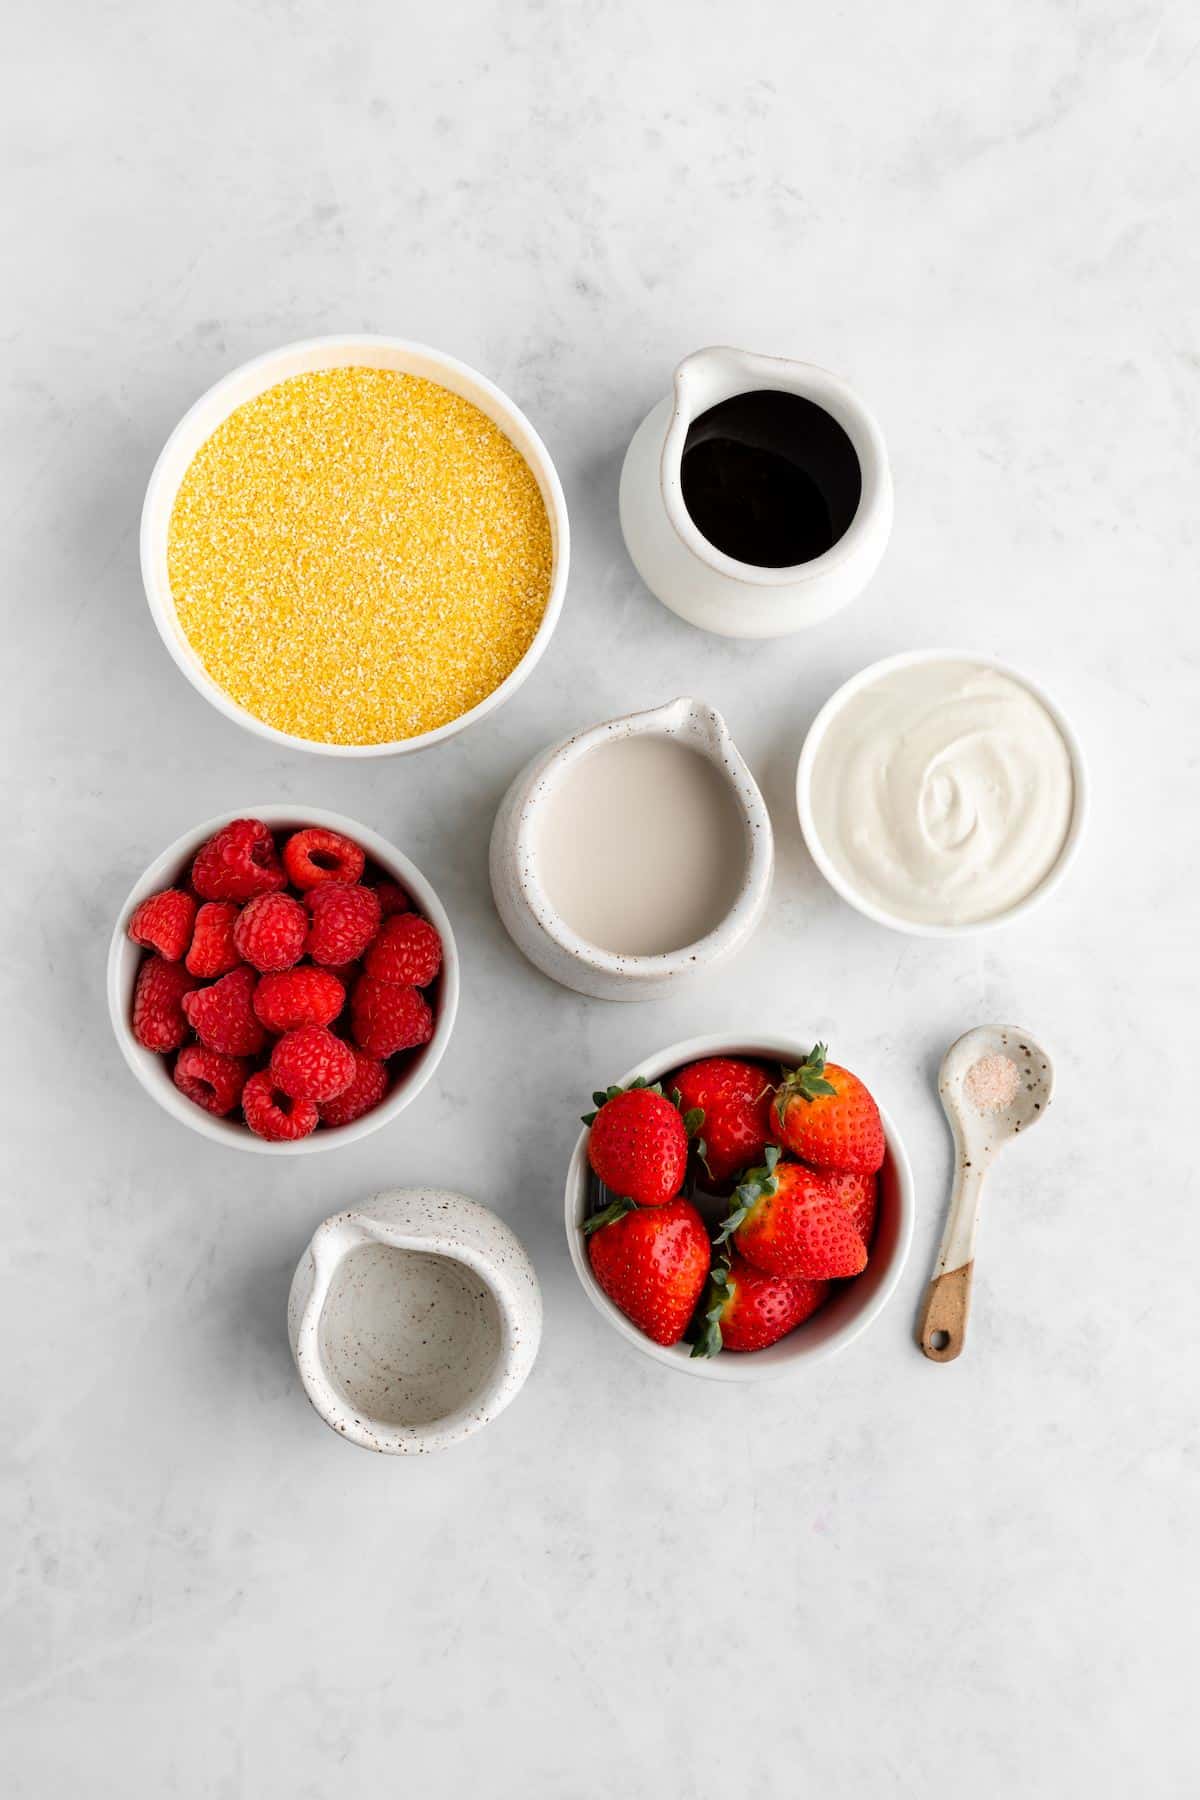 Ingredients for creamy vegan grits measured out in individual bowls.